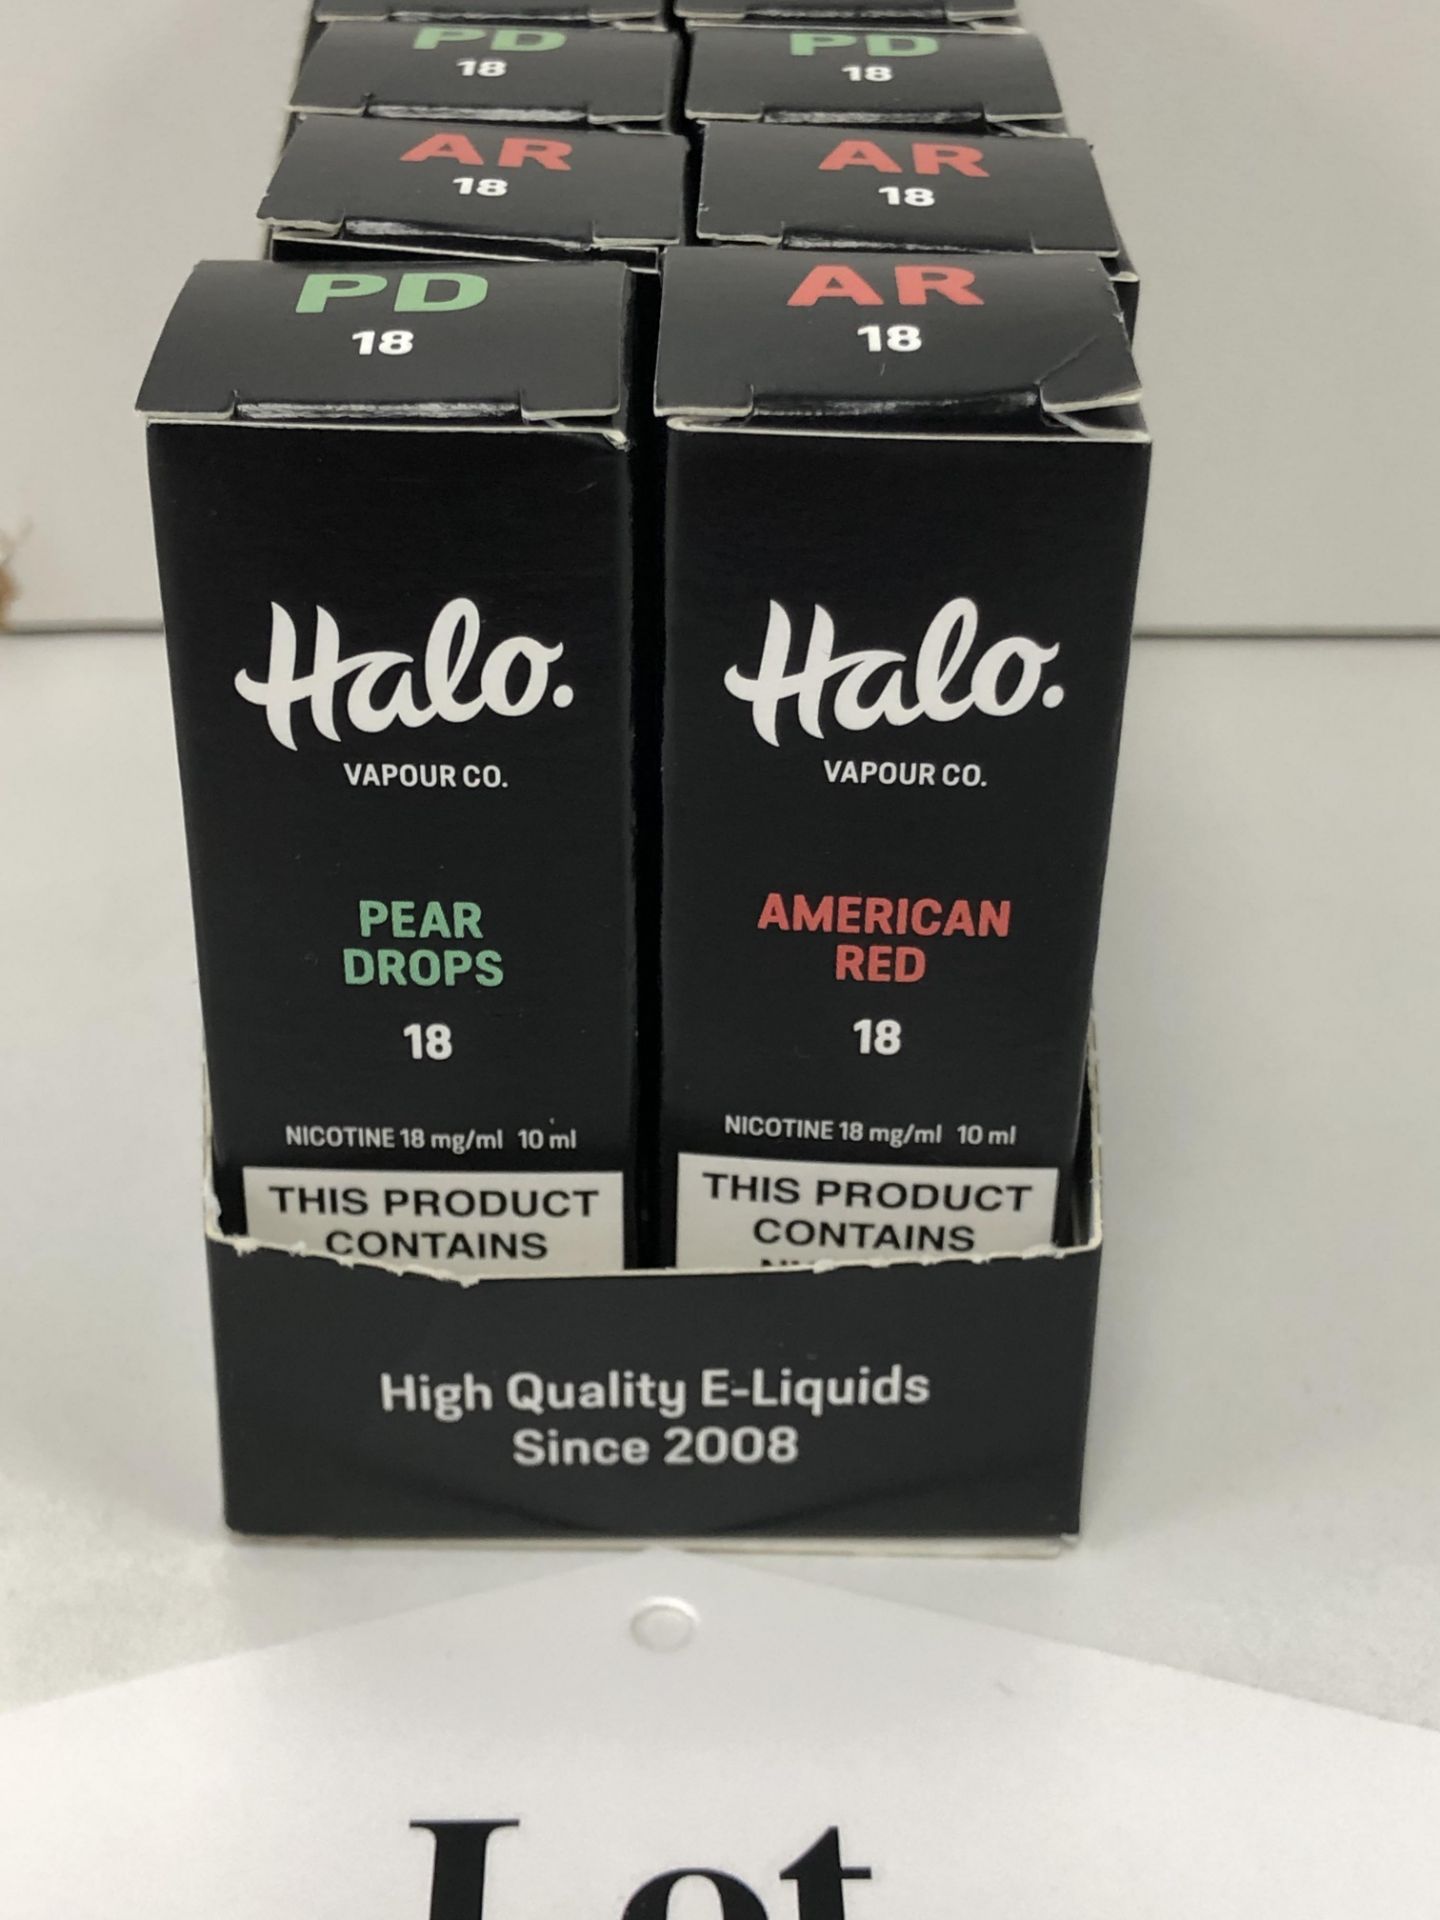 10 x Vapour co Pear drops American red Halo 18 Mg/Ml BNIB- 10 ml |96154519 96129500 - Image 3 of 3